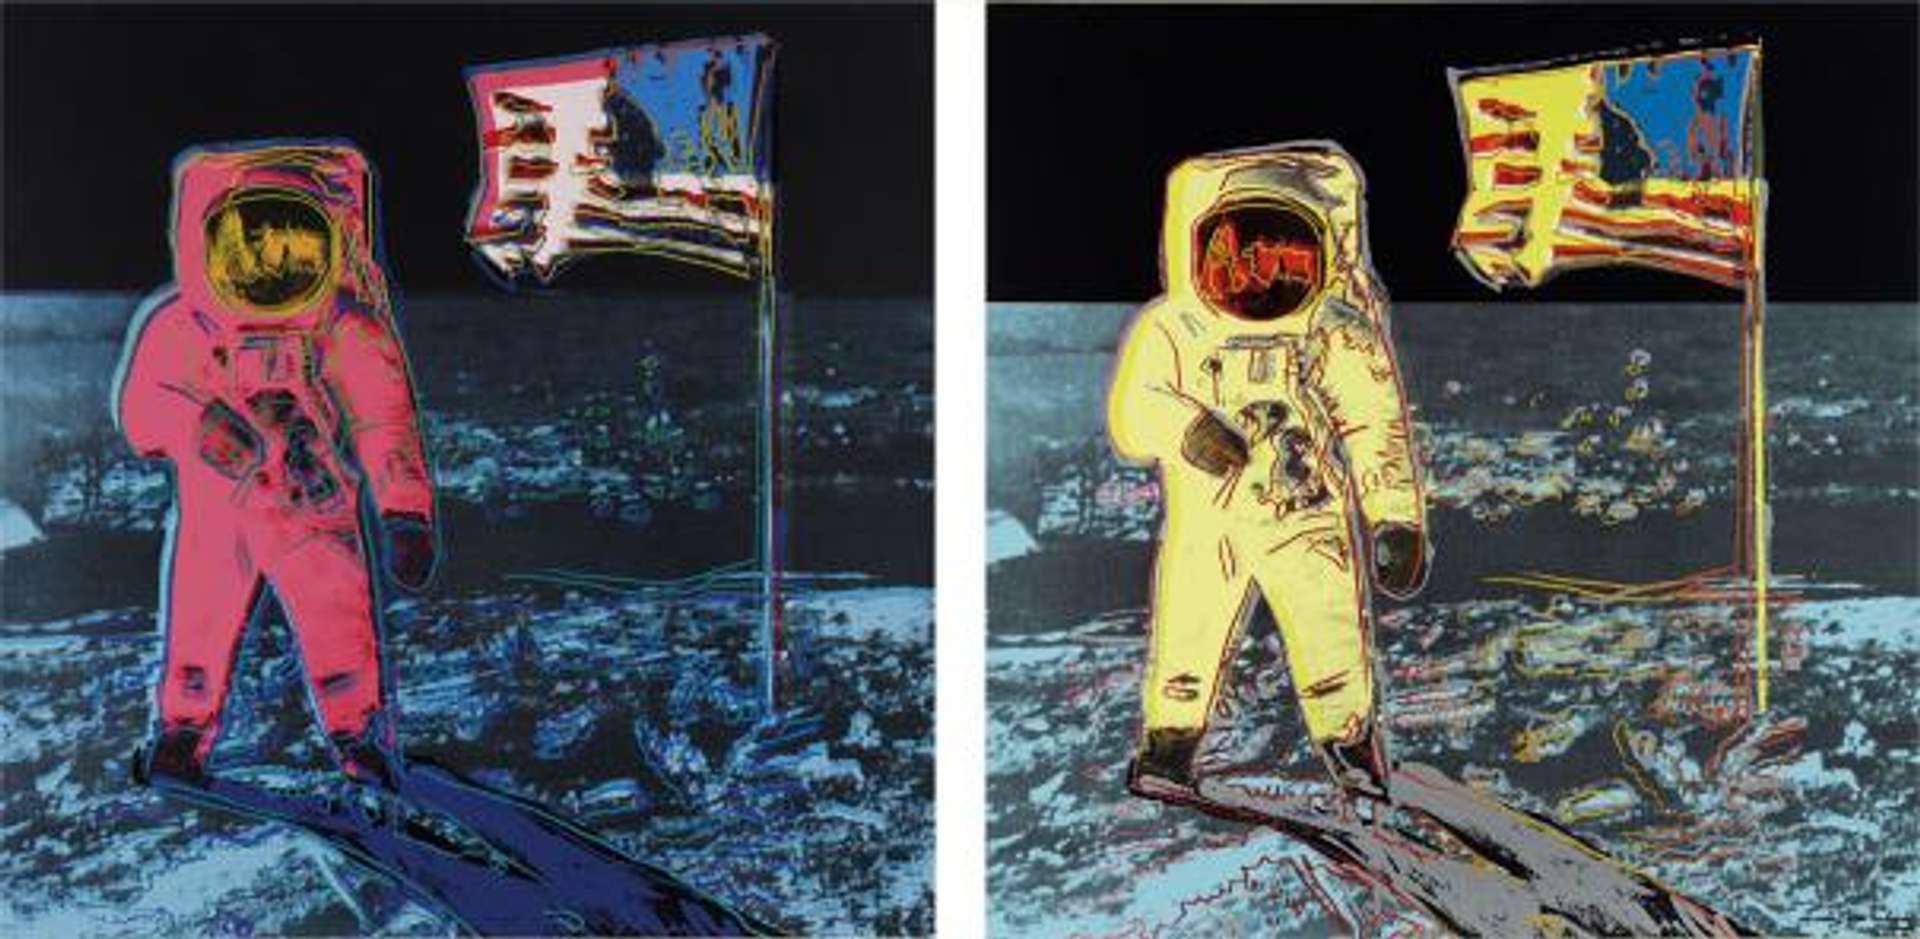 Two screenprints by Andy Warhol depicting an astronaut on the moon standing next to the American flag, with the astronaut in the left work rendered in pink, and the one of the right in pale yellow.